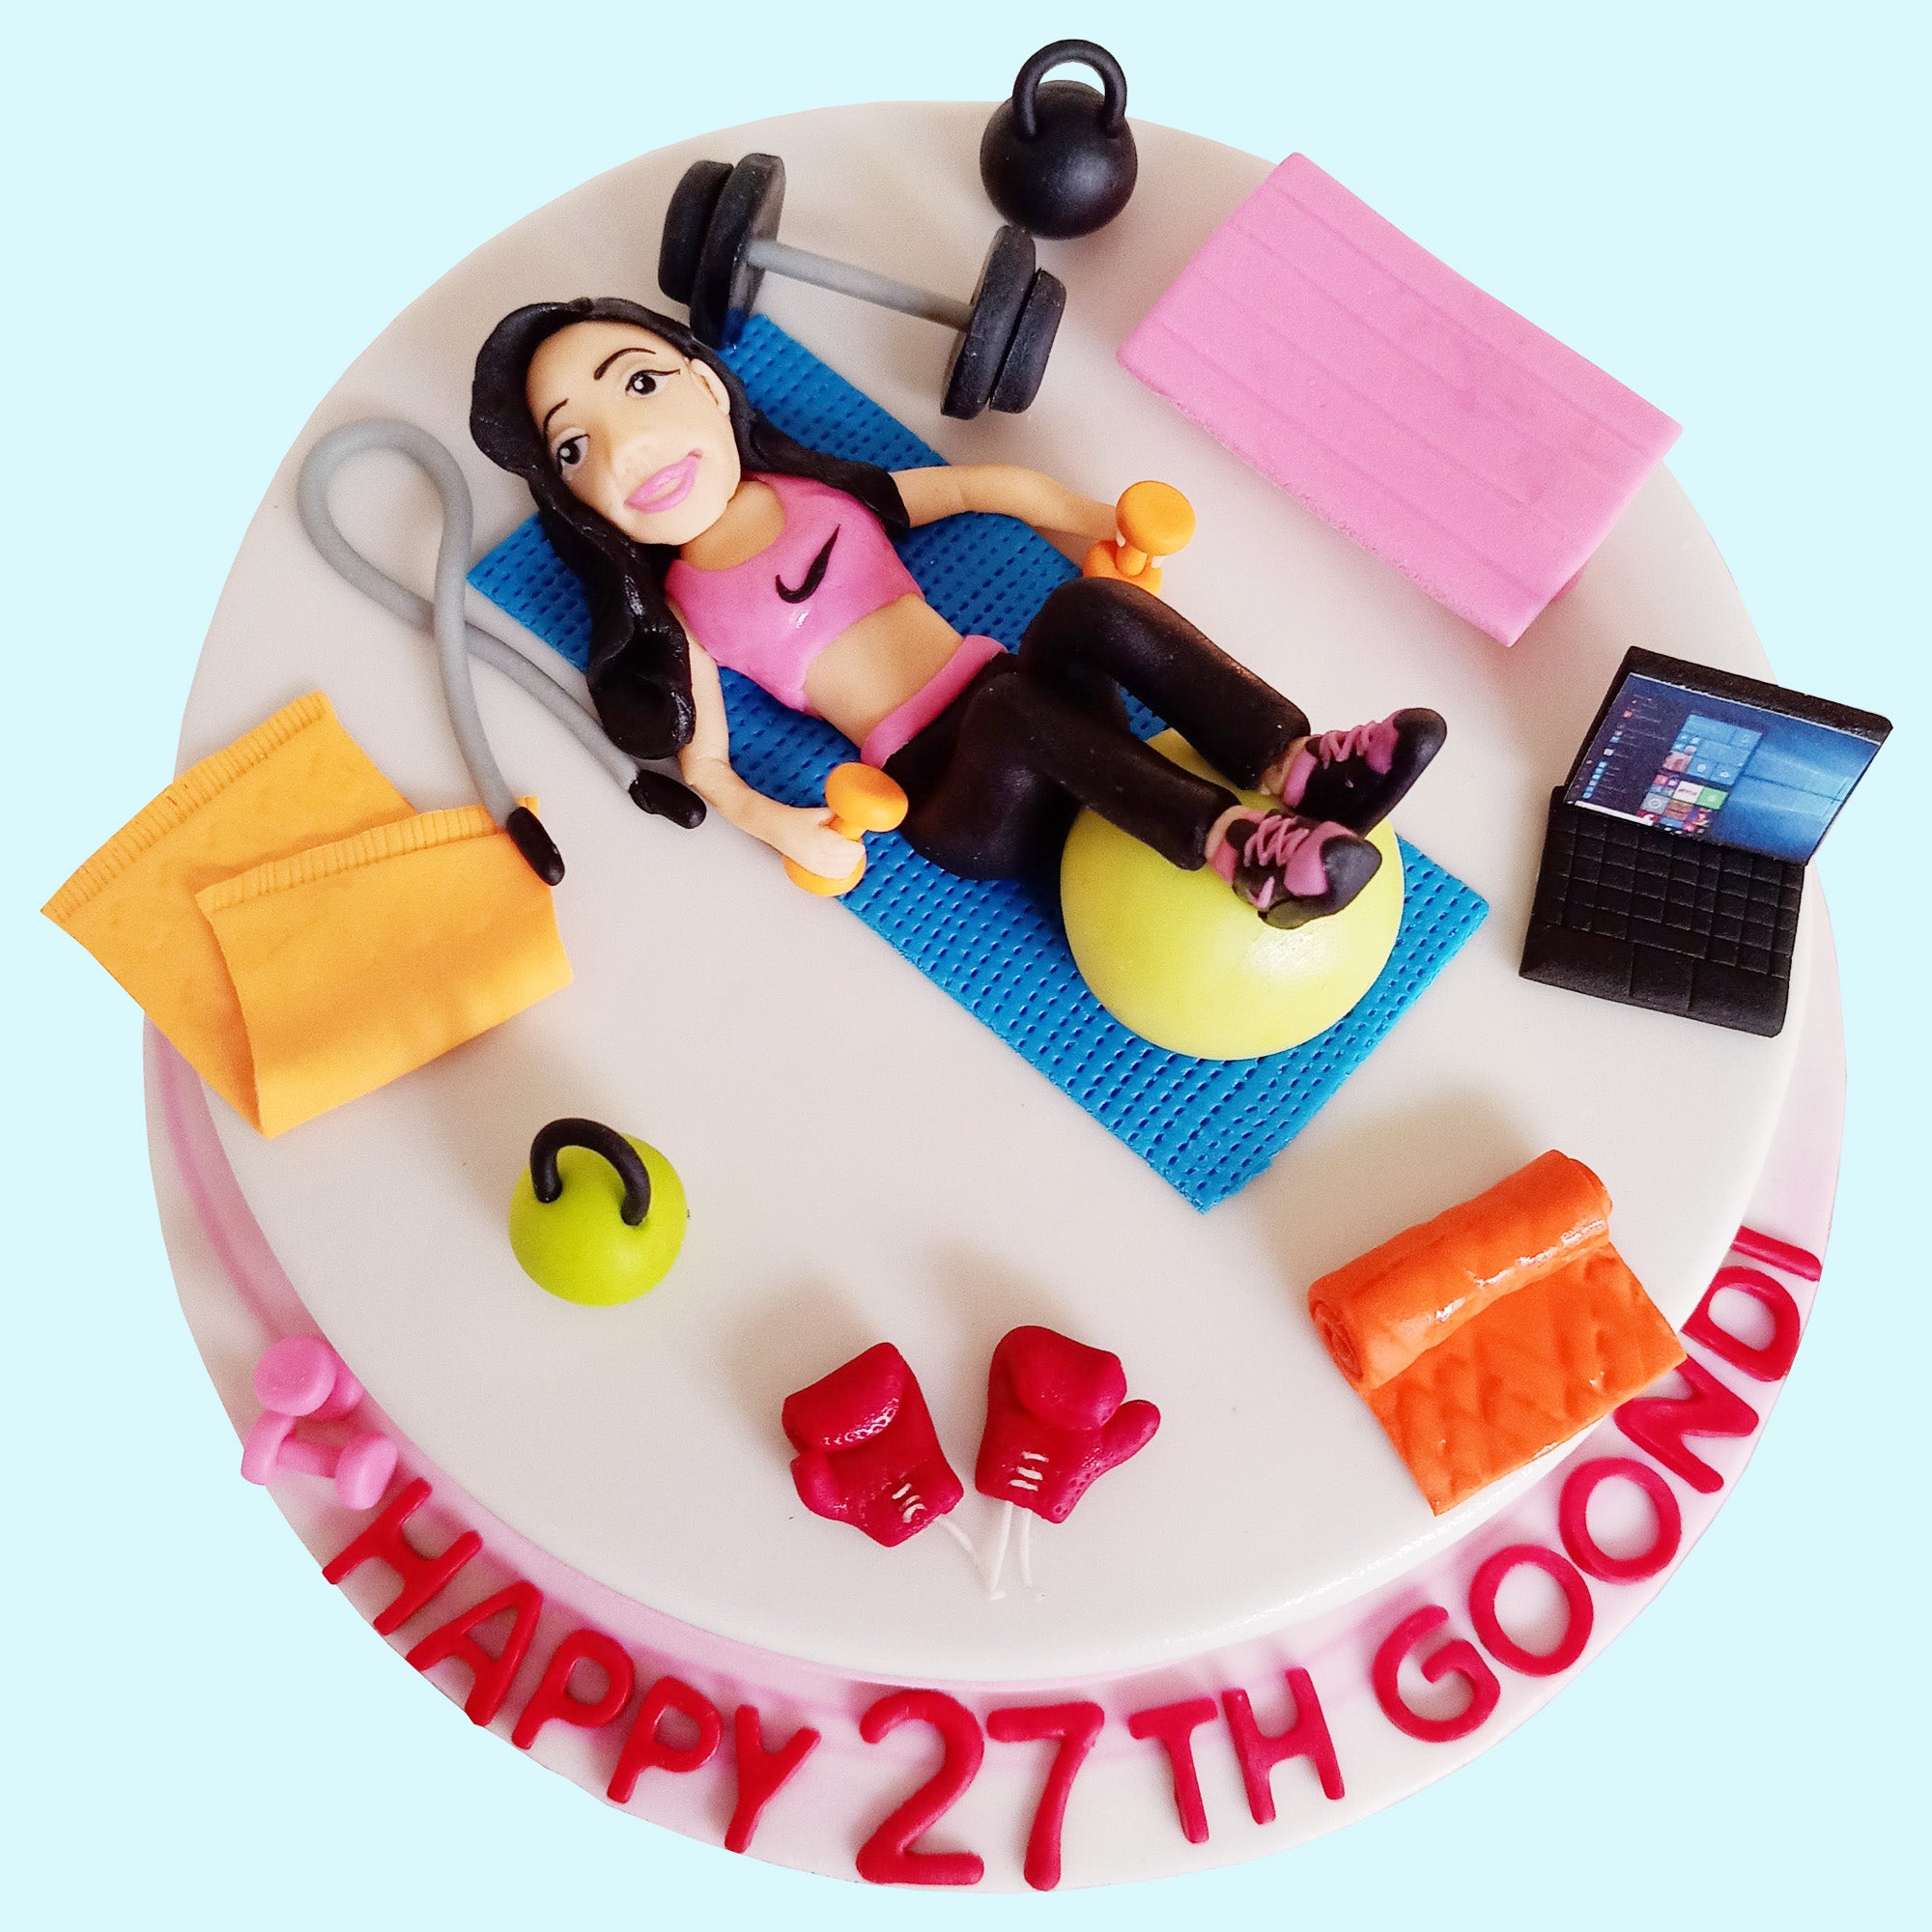 GYM Workout LOVERS this one is for you... - Nisha's Cake Shop | Facebook